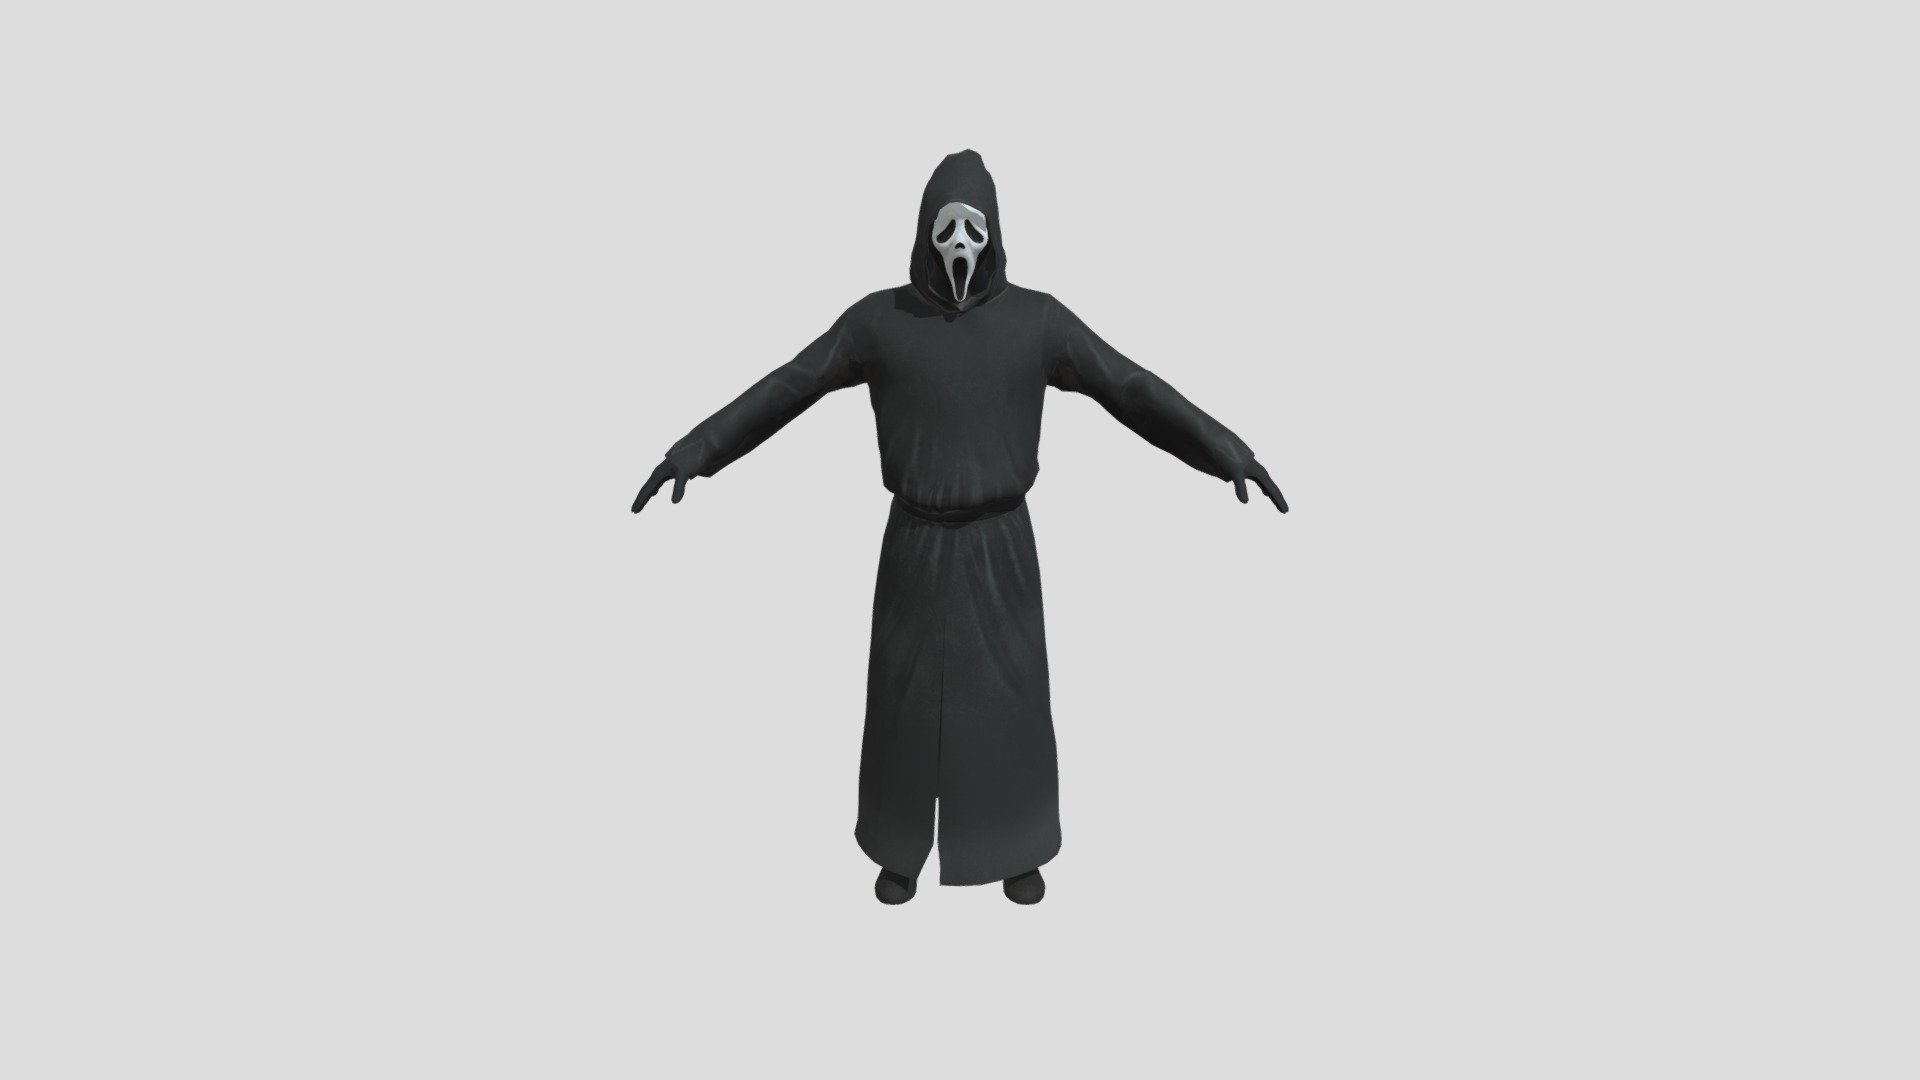 Ghost Face Classic Game Model
Download this free ghost face model its completely low poly! Please like and comment down if you want more models! I'll upload more 3d model